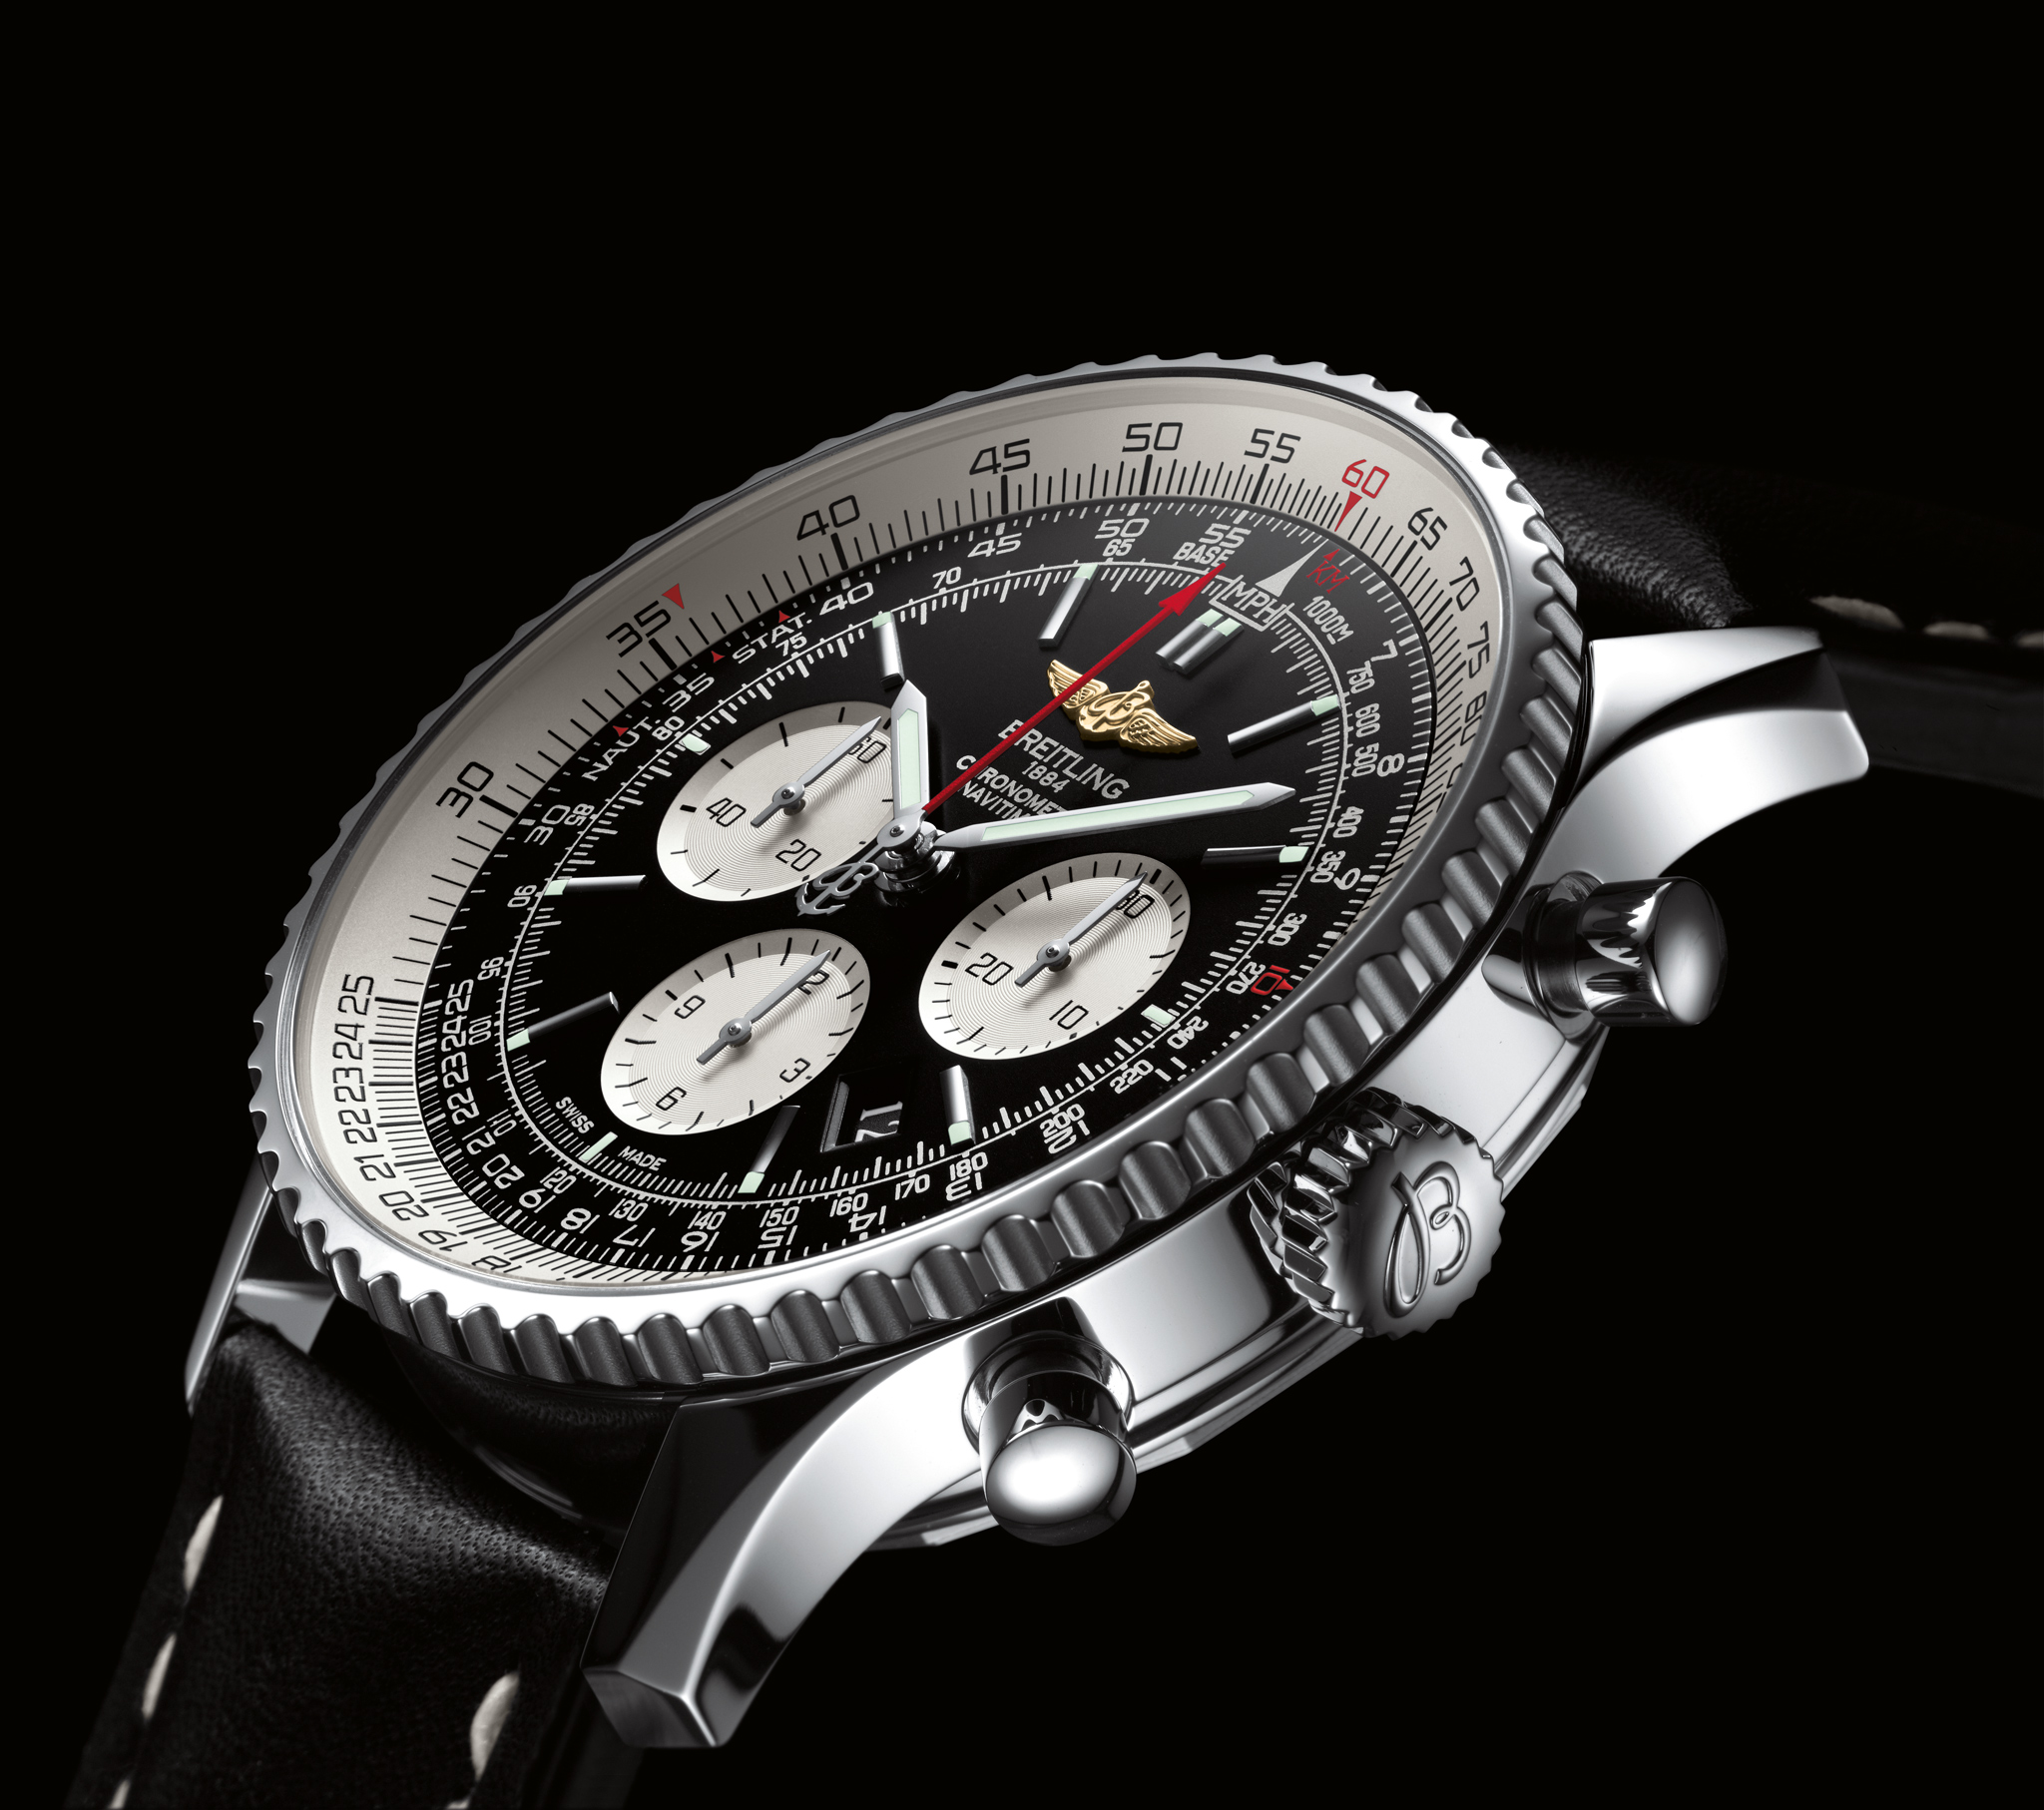 Breitling Super Avengers chronograph black dial A13375101B1A1Breitling Super Avengers Chronograph Black Steel Limited Edition - Papers and Services 2020 (breitling) M1337010/B930 2008